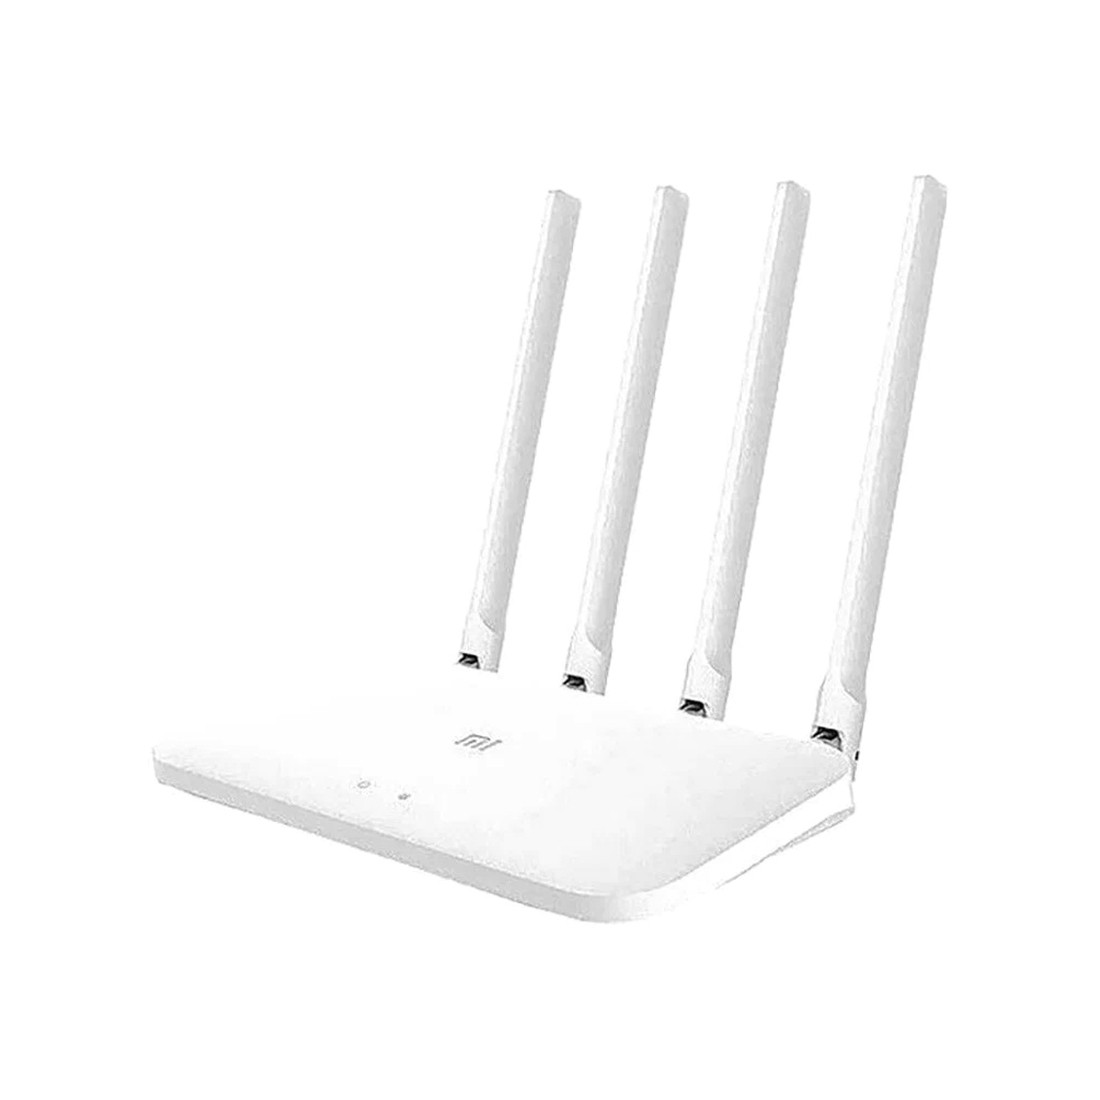 Маршрутизатор Xiaomi Router AC1200 (Маршрутизаторы) - фото 1 - id-p115008330